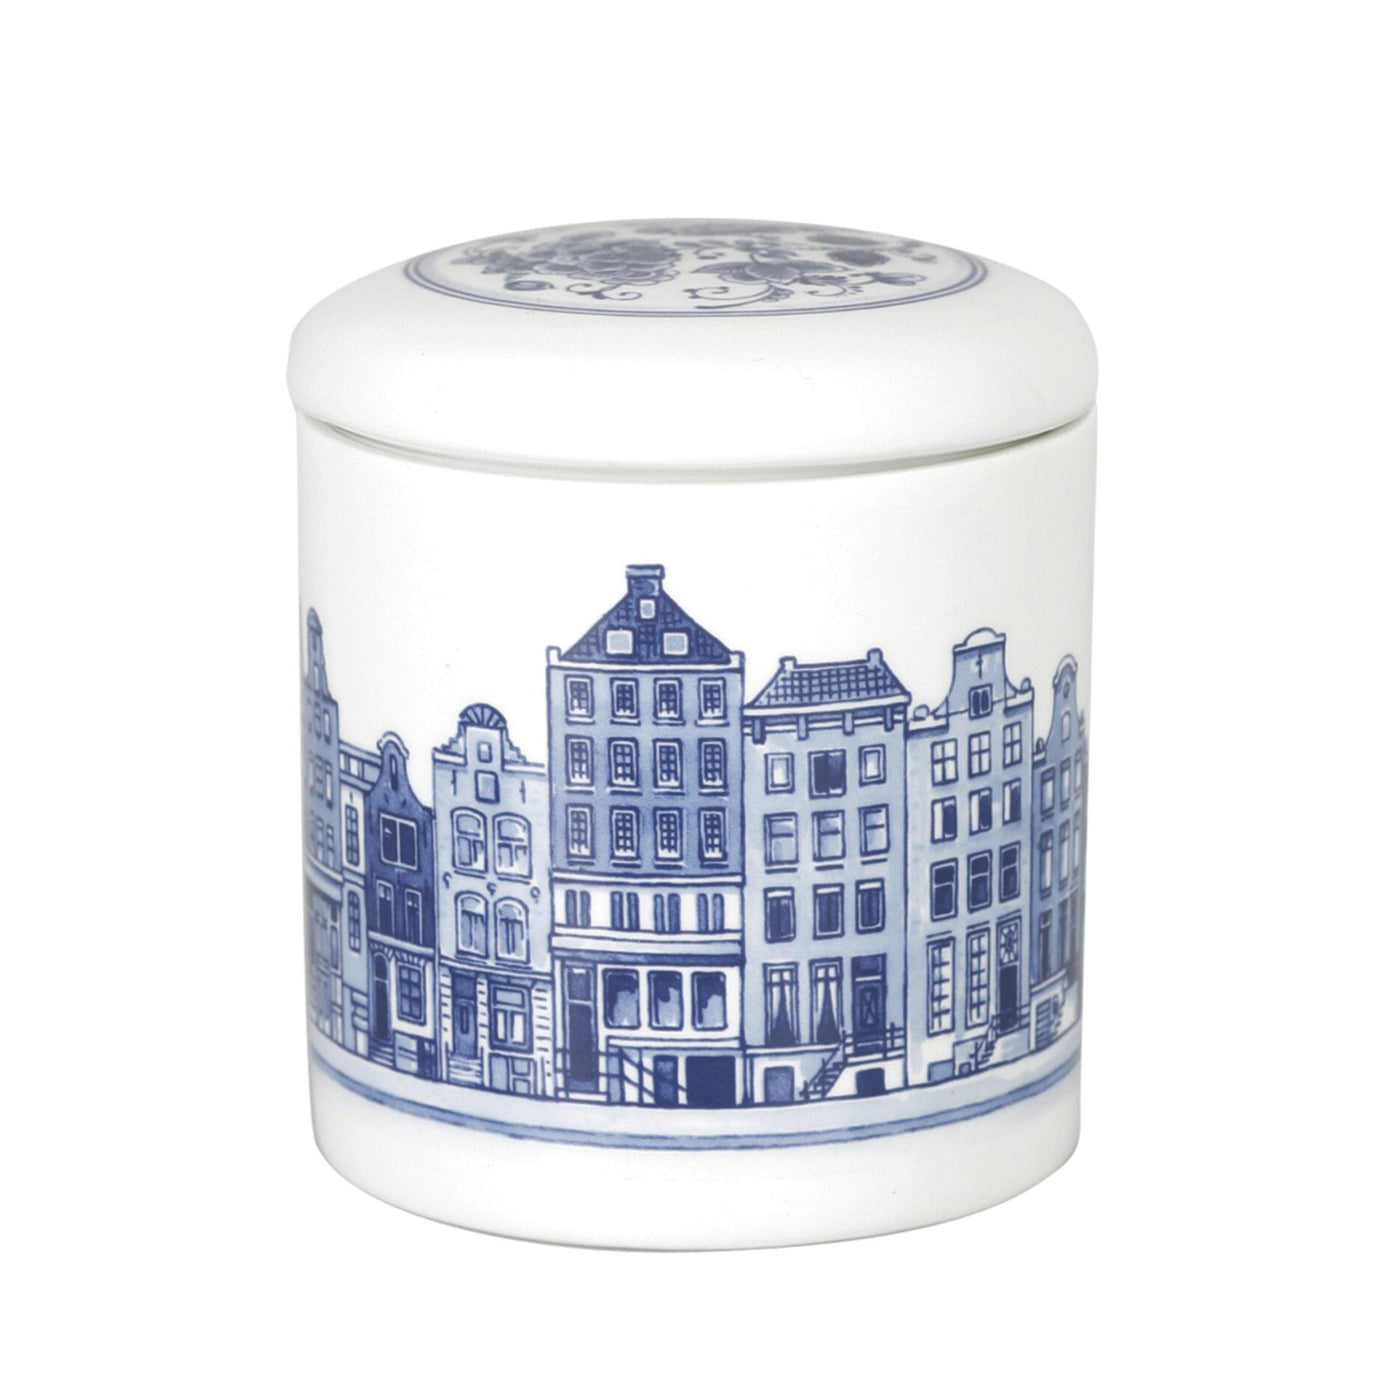 Cookie Jar Canal Houses Delft Blue